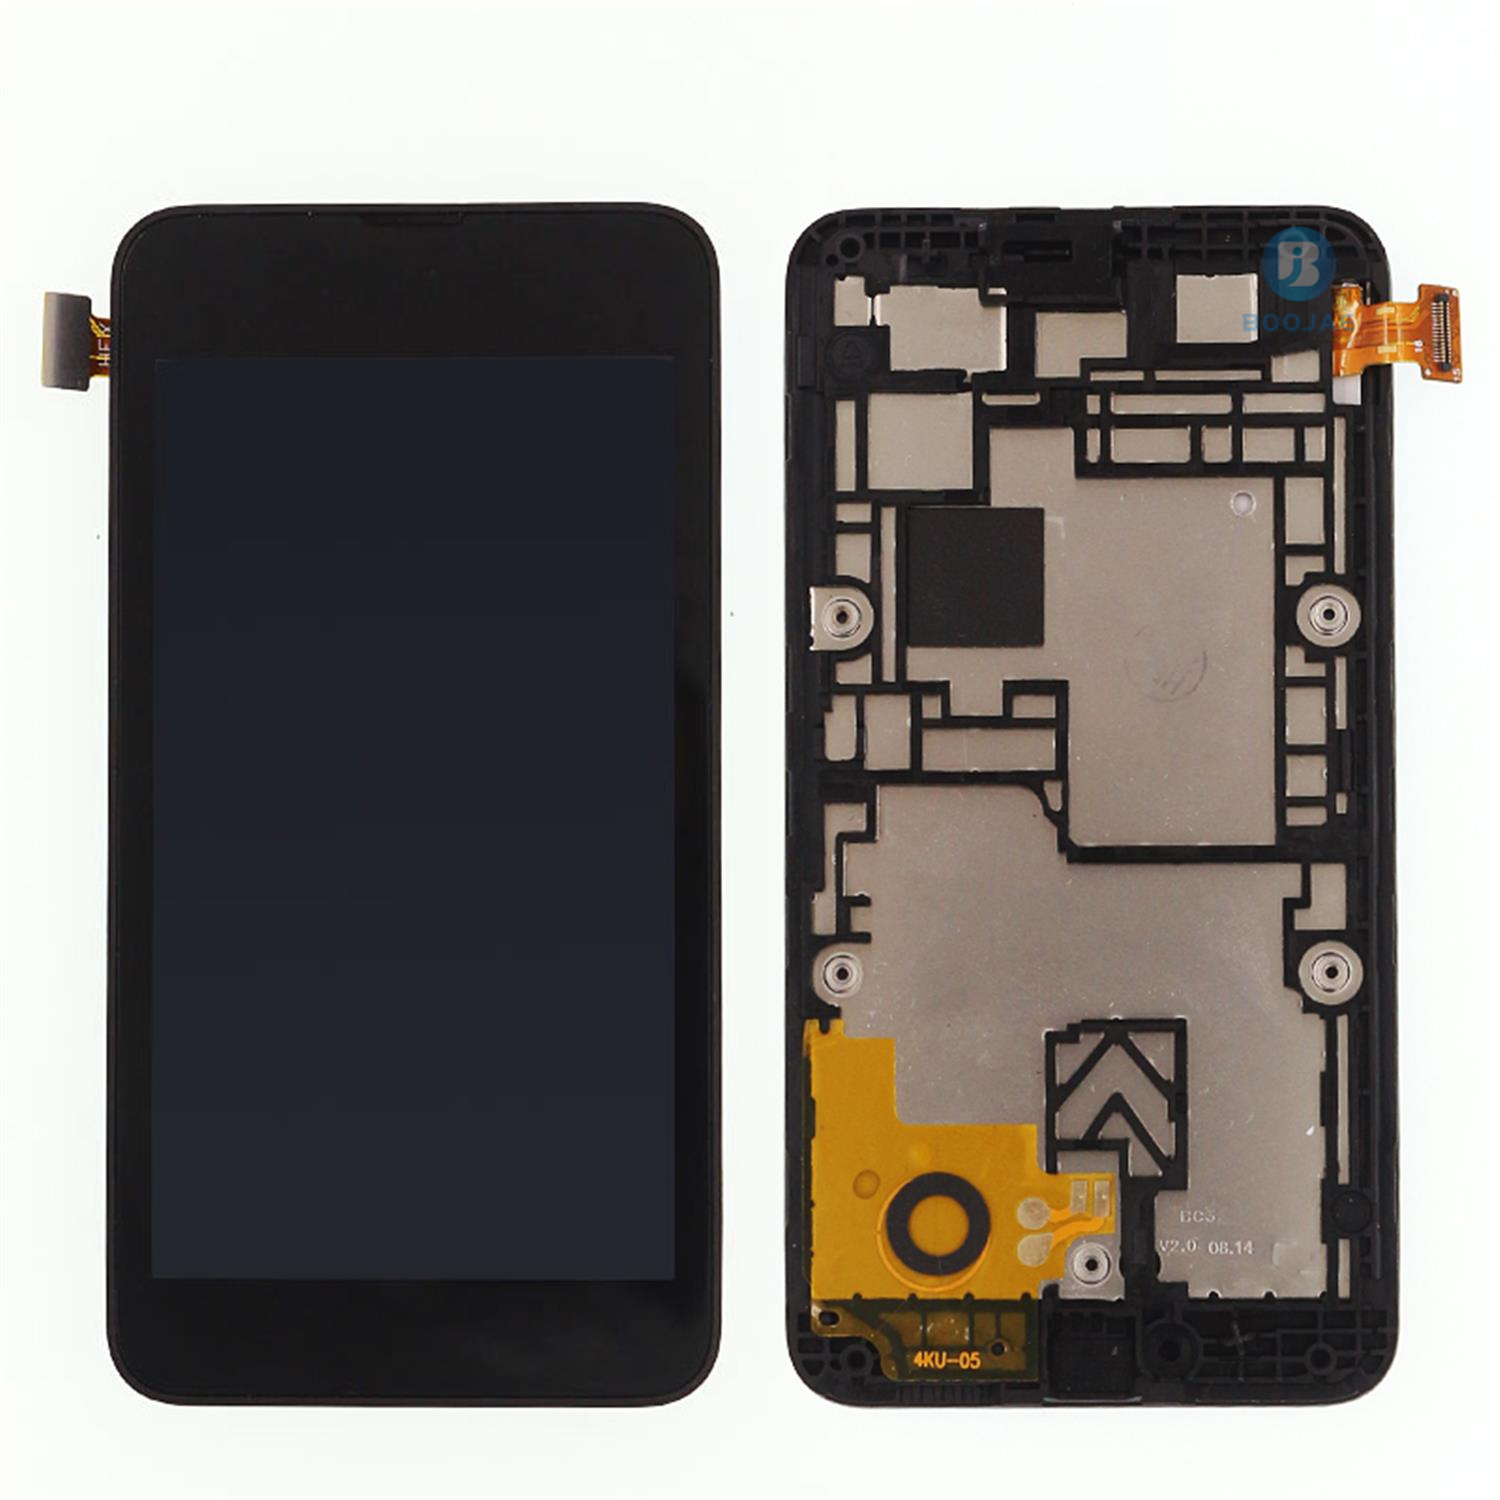 For Nokia Lumia 530 LCD Screen Display and Touch Panel Digitizer Assembly Replacement